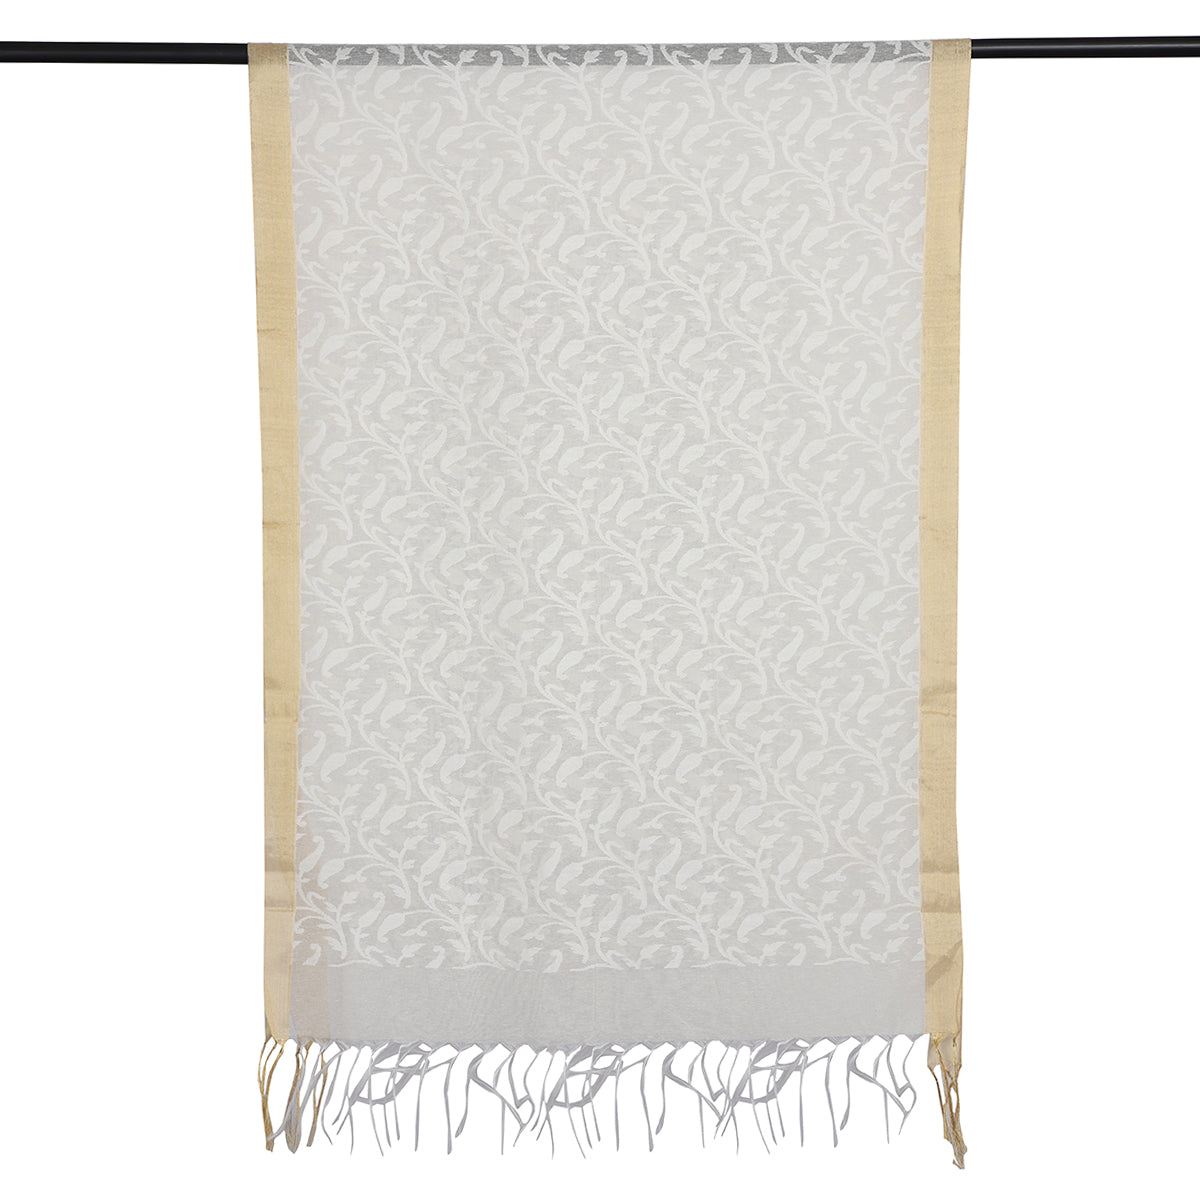 Off White Color Handwoven Jacquard Cotton Silk Dupatta with Tassels